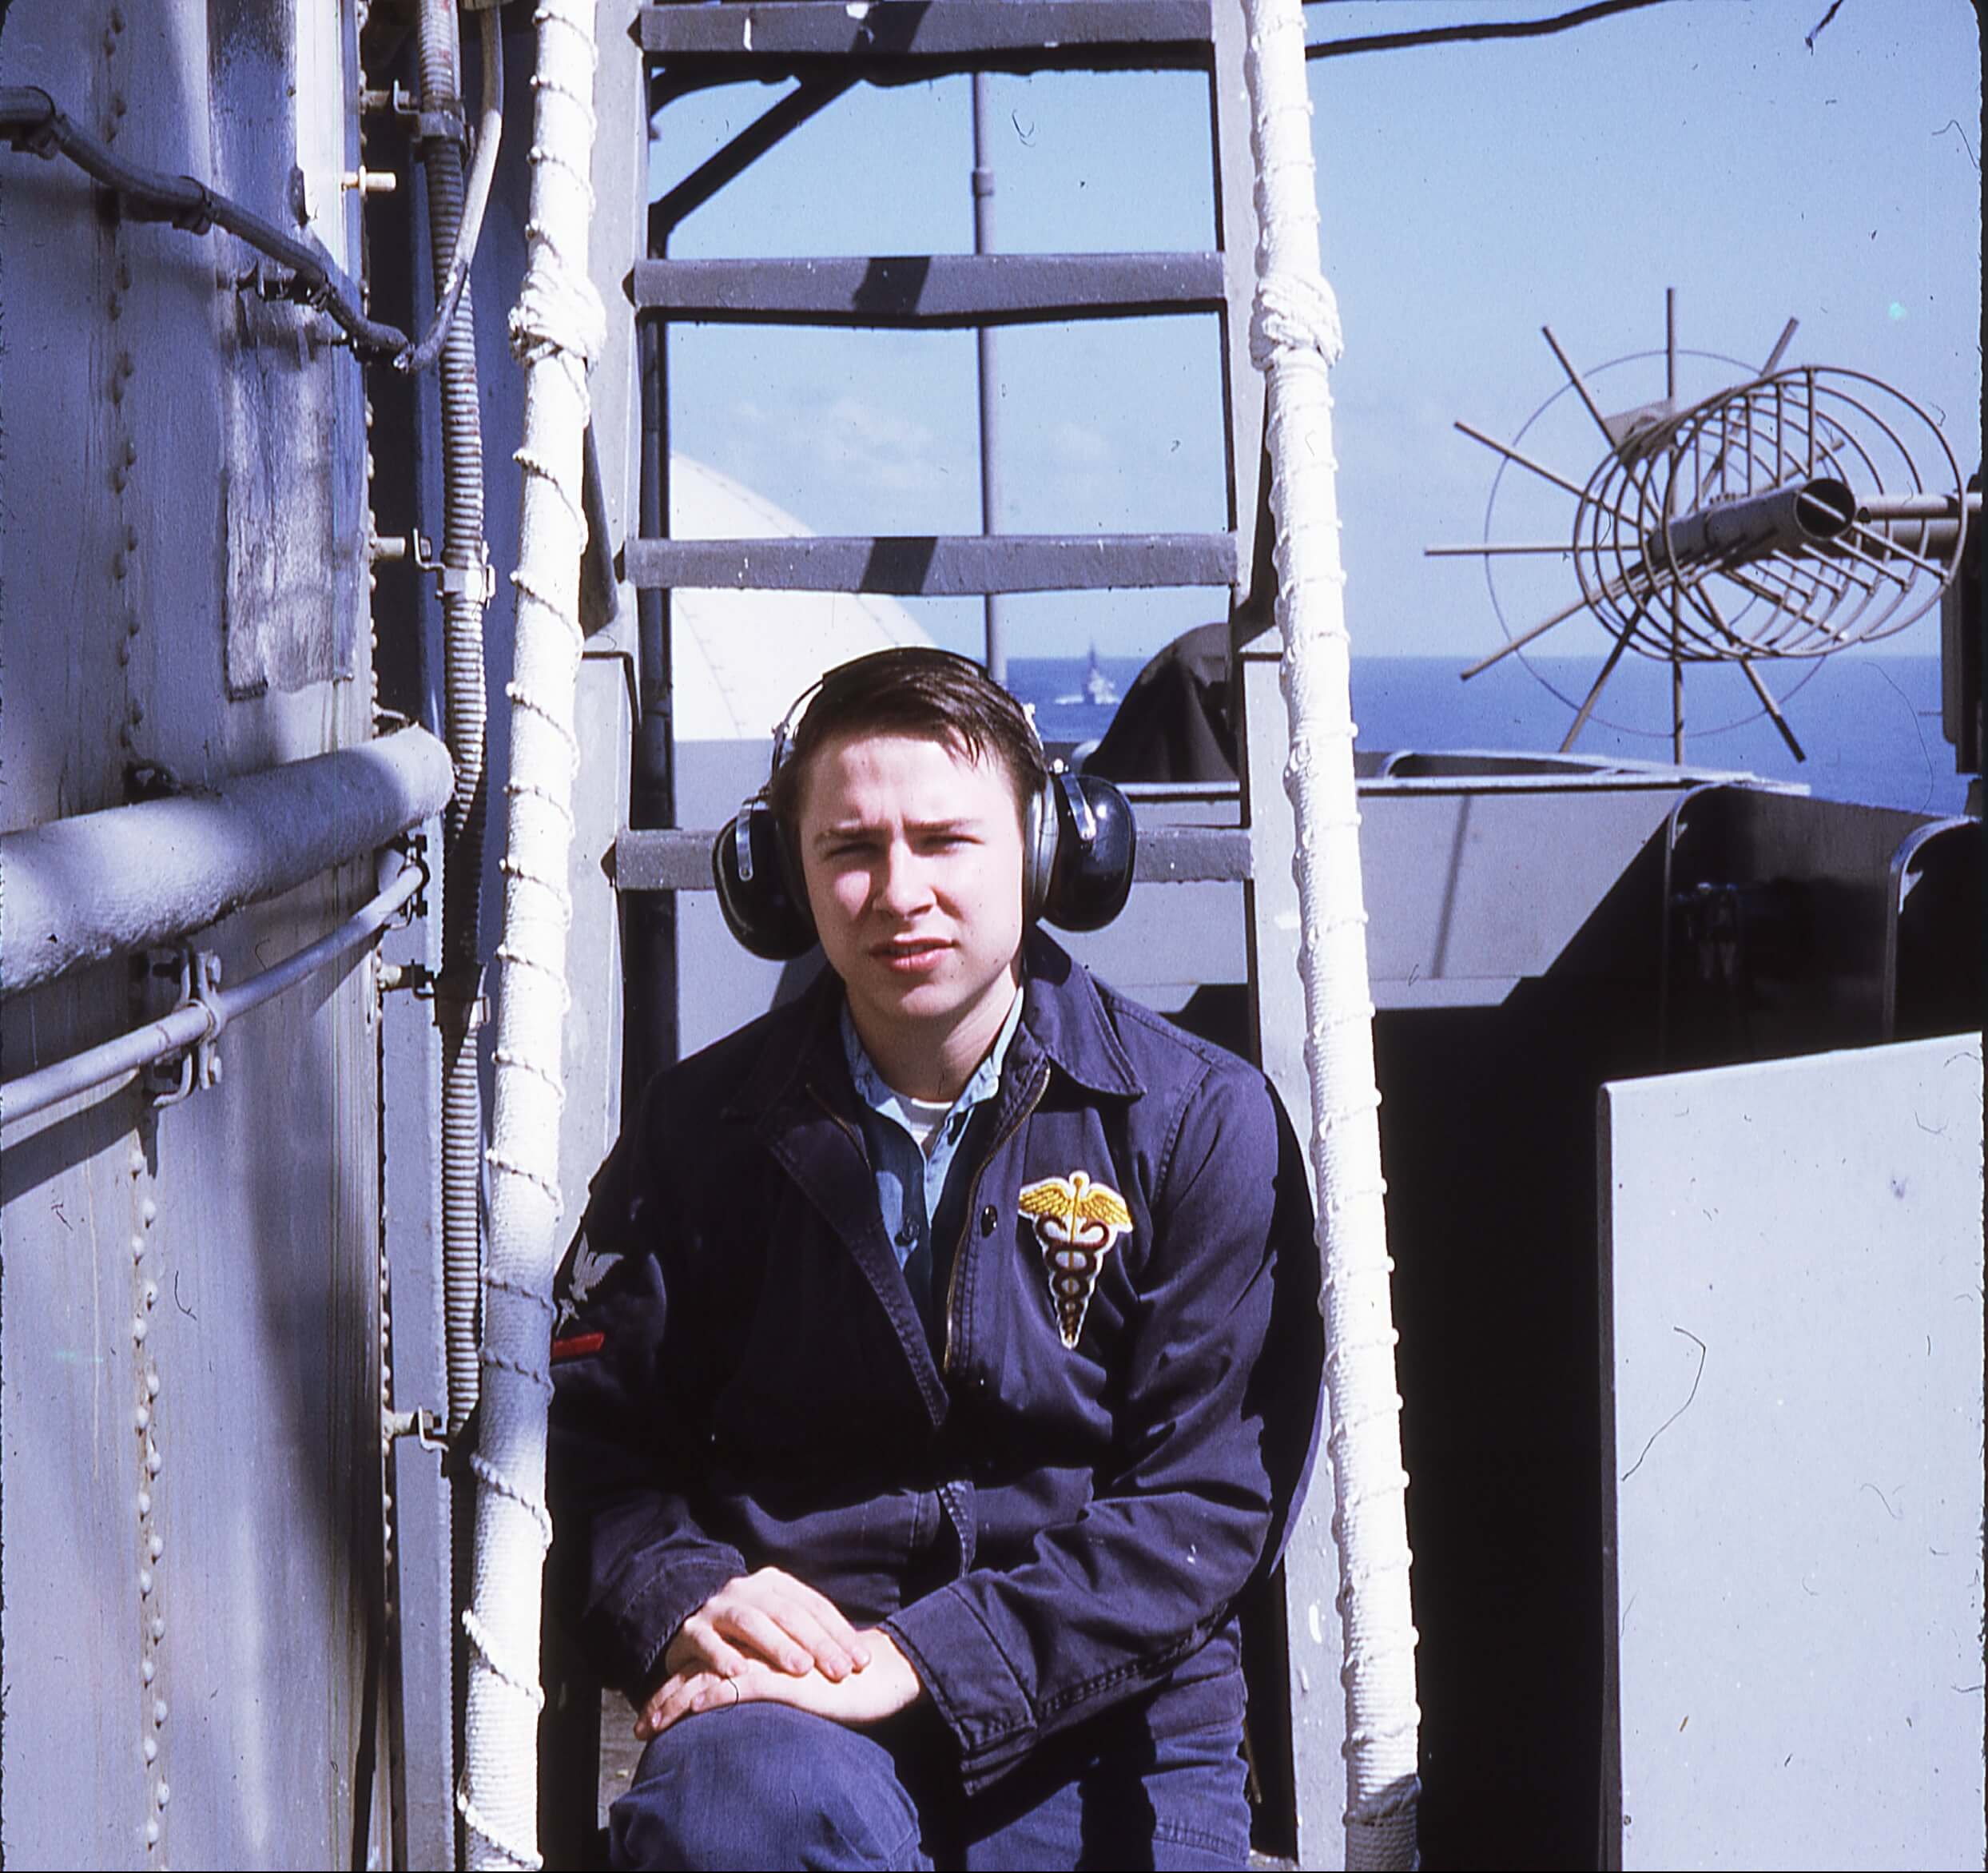 A young man in a navy blue jumpsuit wearing big headphones over his ears, sitting on a ladder on a boat.